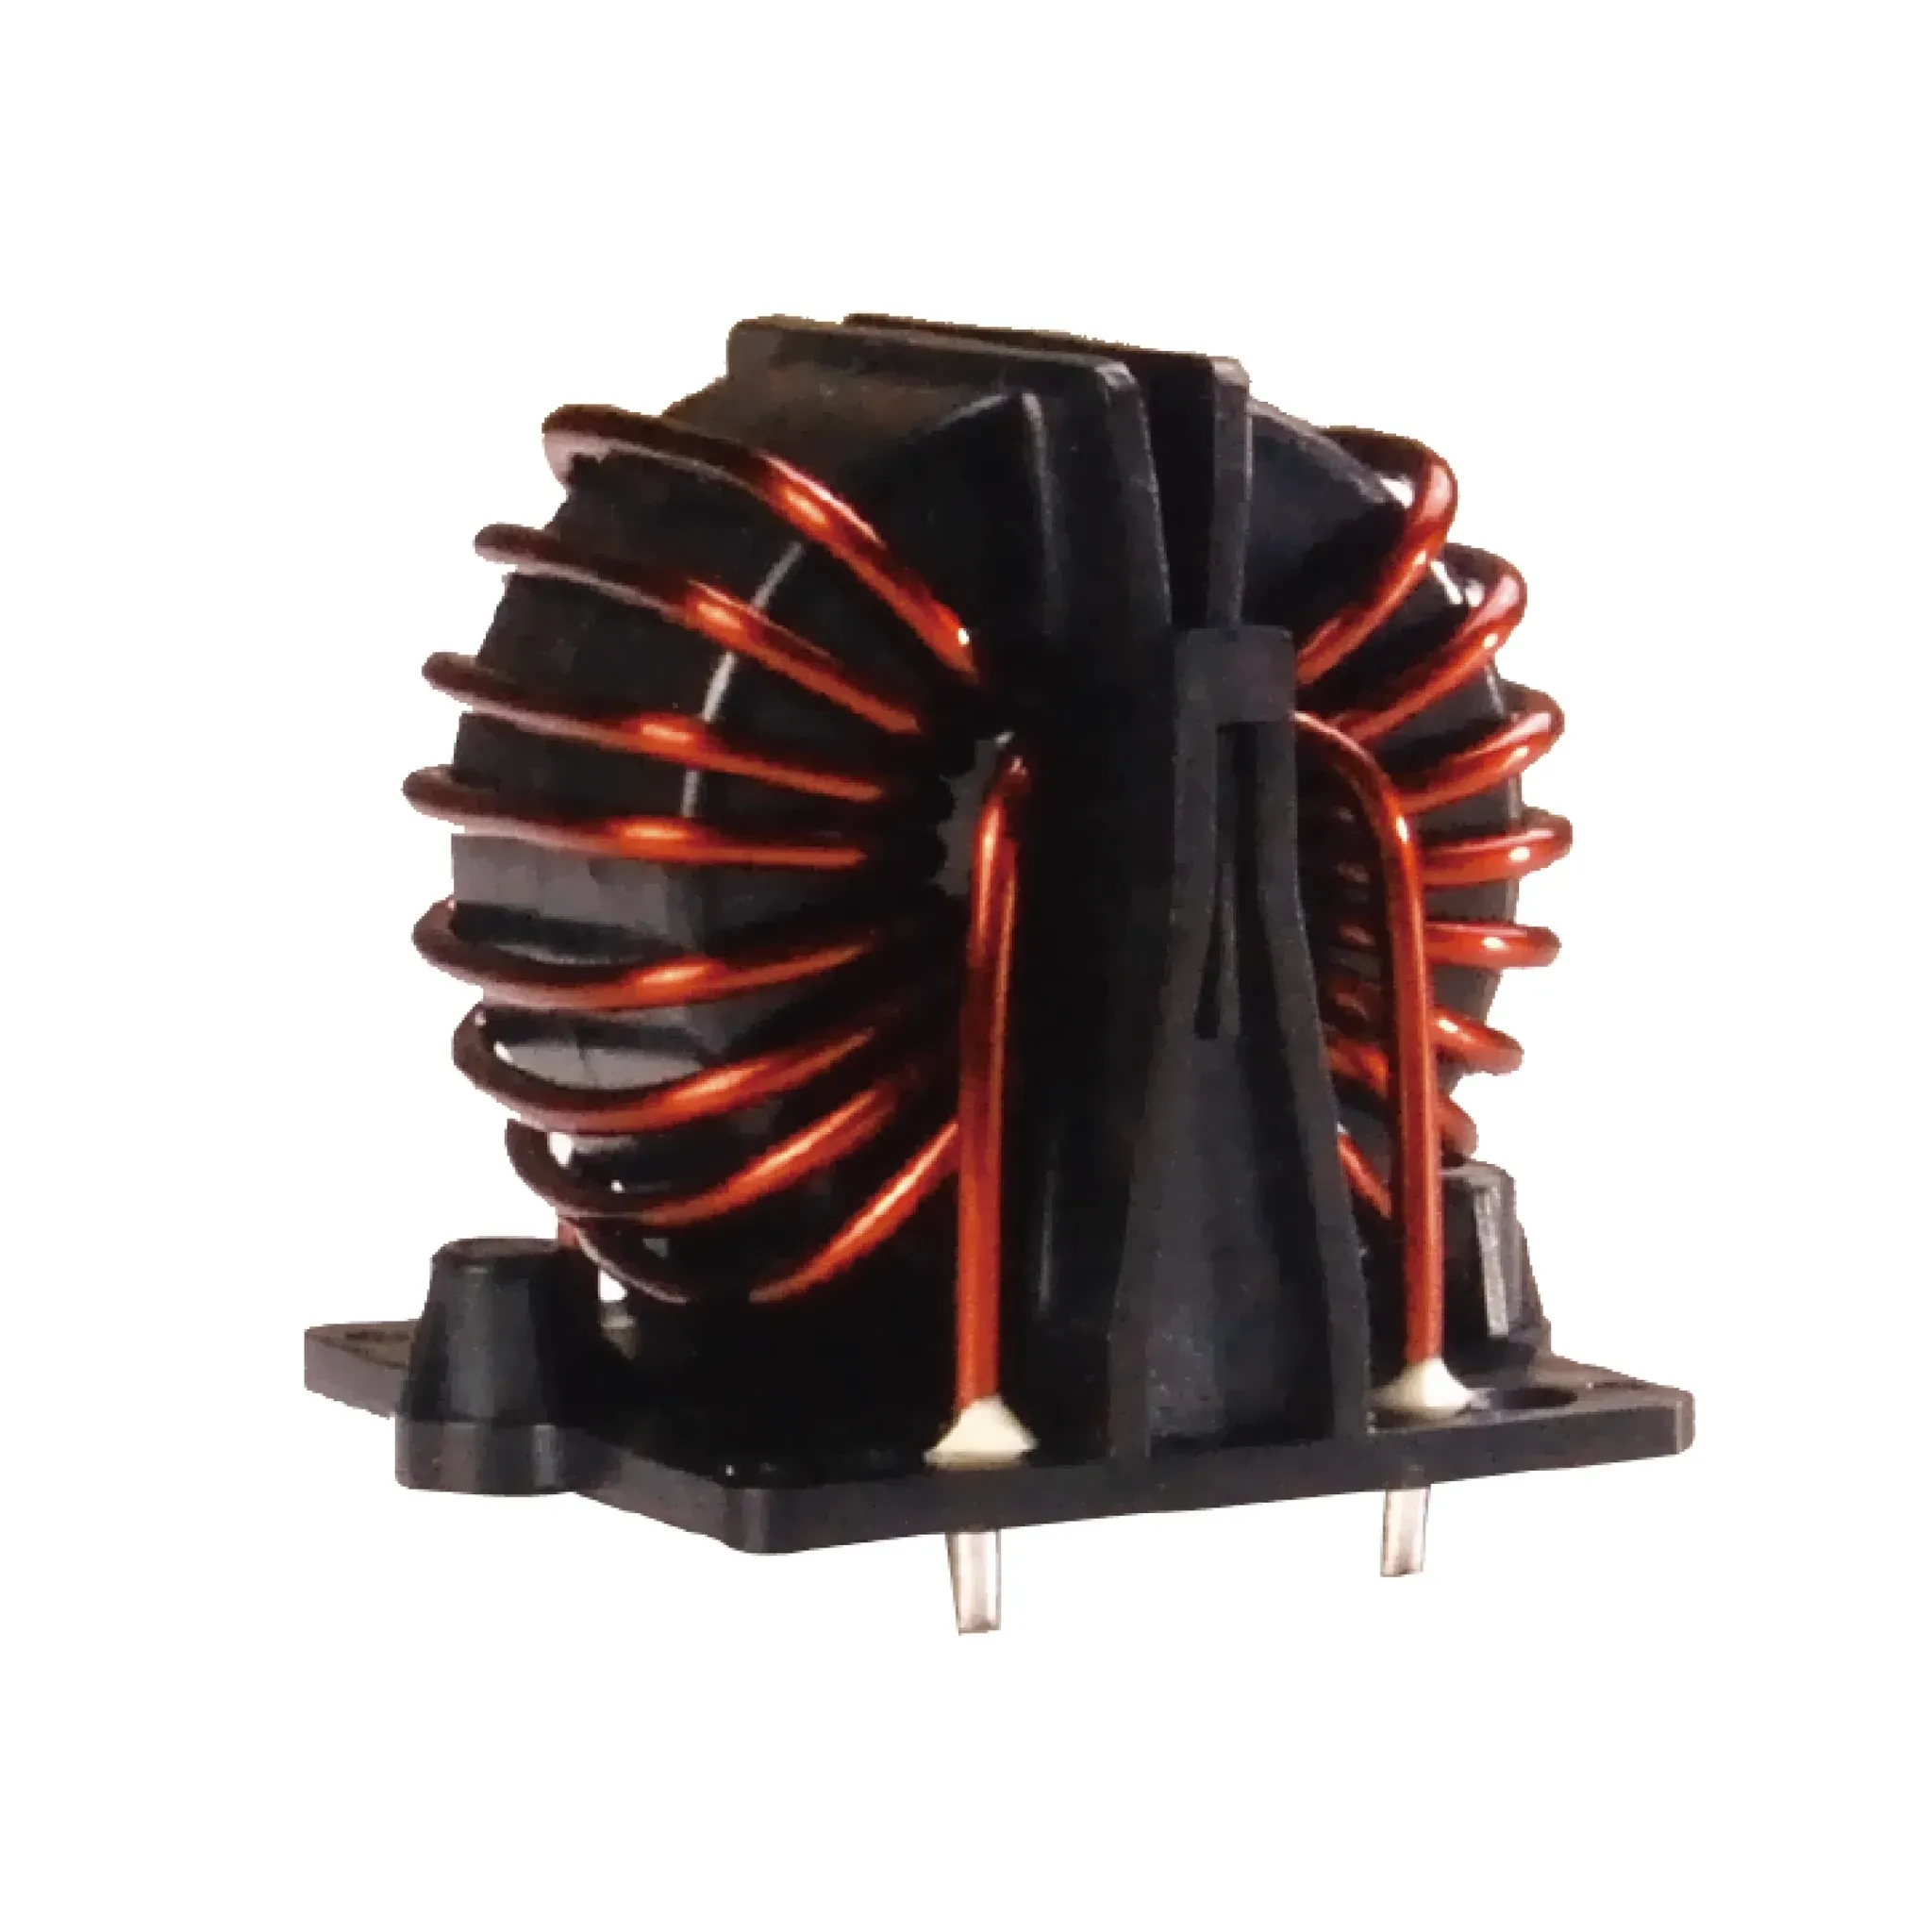 YHDC 1mH COMMON MODE CHOKE ANTI-INTERFERENCE INDUCTANCE COIL LB221-16-10L RATED CURRENT 16A